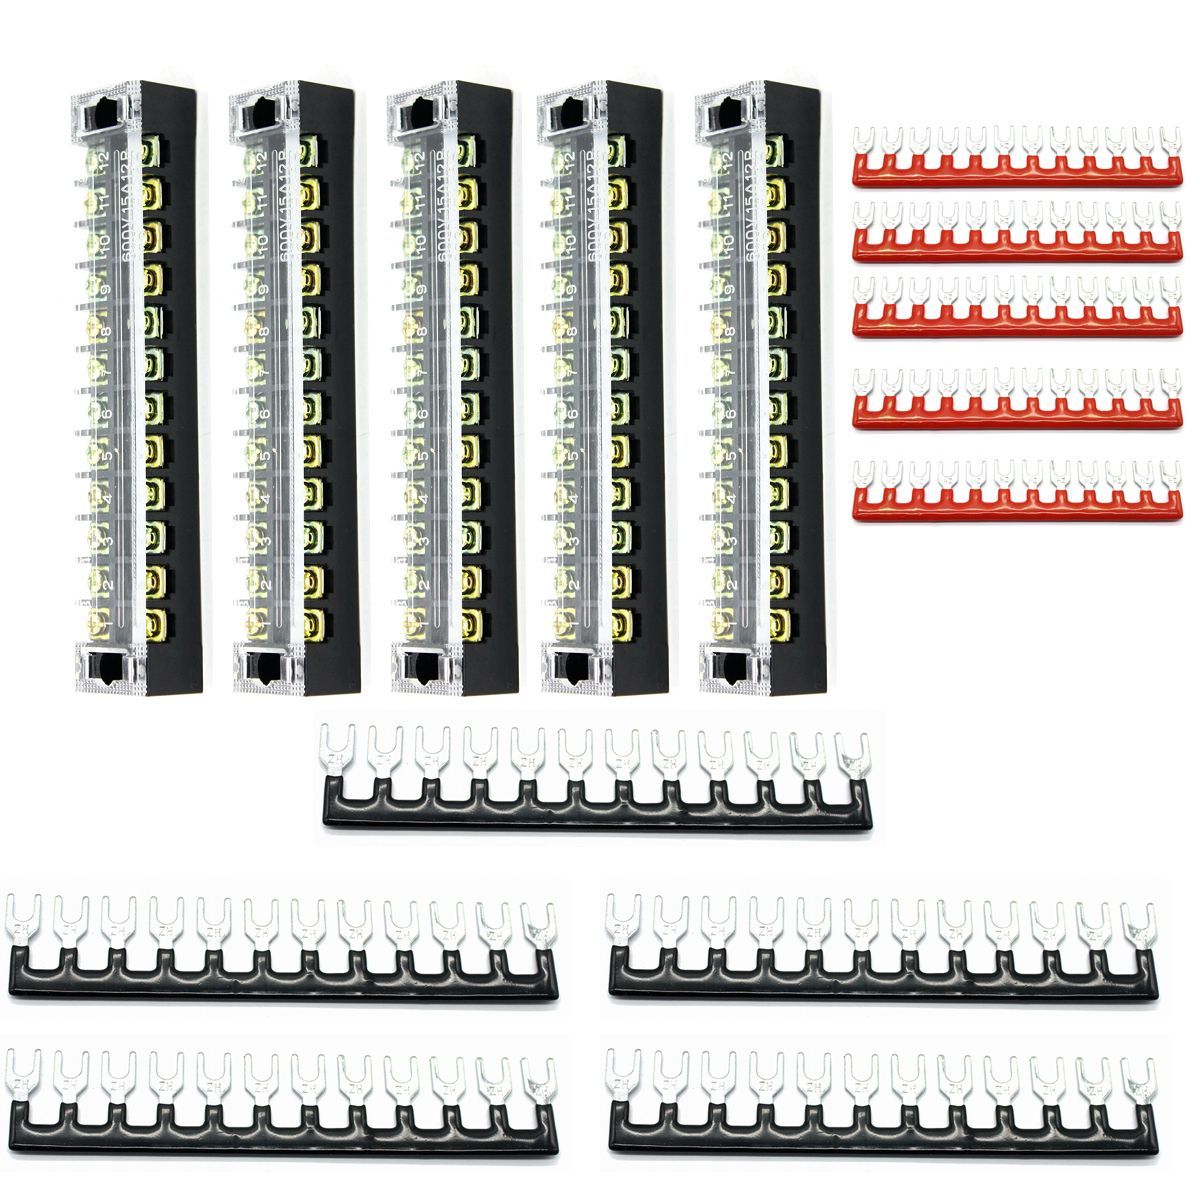 5612-Positions-Dual-Rows-600V-15A-Wire-Barrier-Block-Terminal-Strip-Power-Distribution-Terminal-1335256